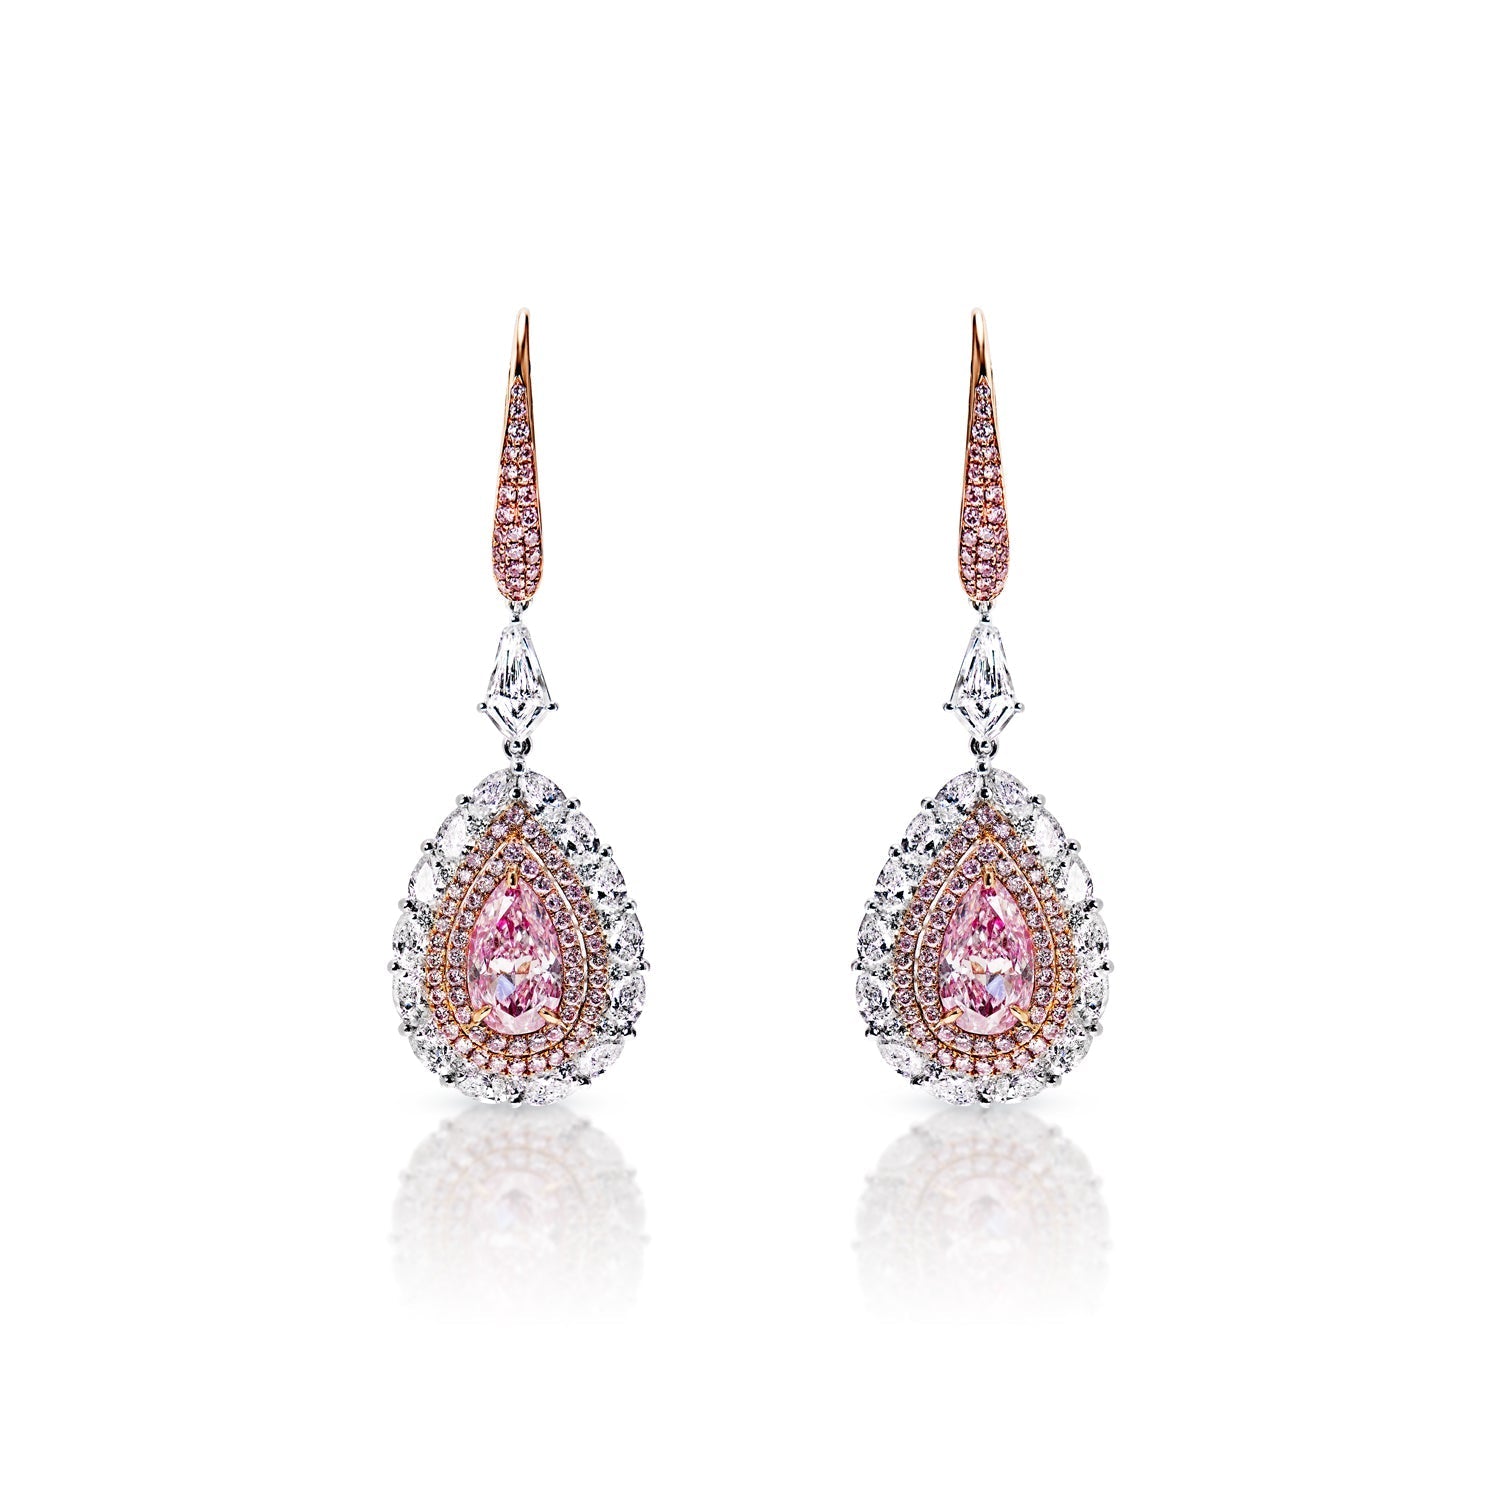 Julie 5 Carat Light and Faint Pink VS1-SI1 Pear Shape Diamond Hanging Earrings in 18k White & Rose Gold Front View